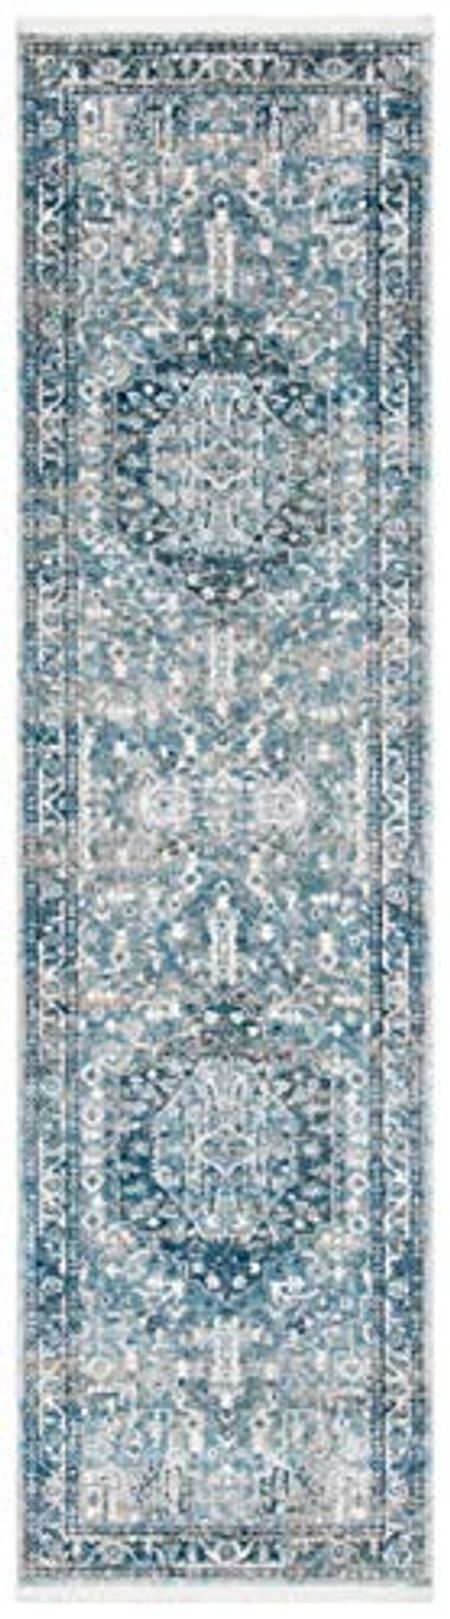 SAFAVIEH Victoria Collection 2'2" x 6' Blue/Grey VIC933F Vintage Oriental Medallion Distressed Non-Shedding Living Room Entryway Hallway Bedroom Foyer Accent Runner Rug